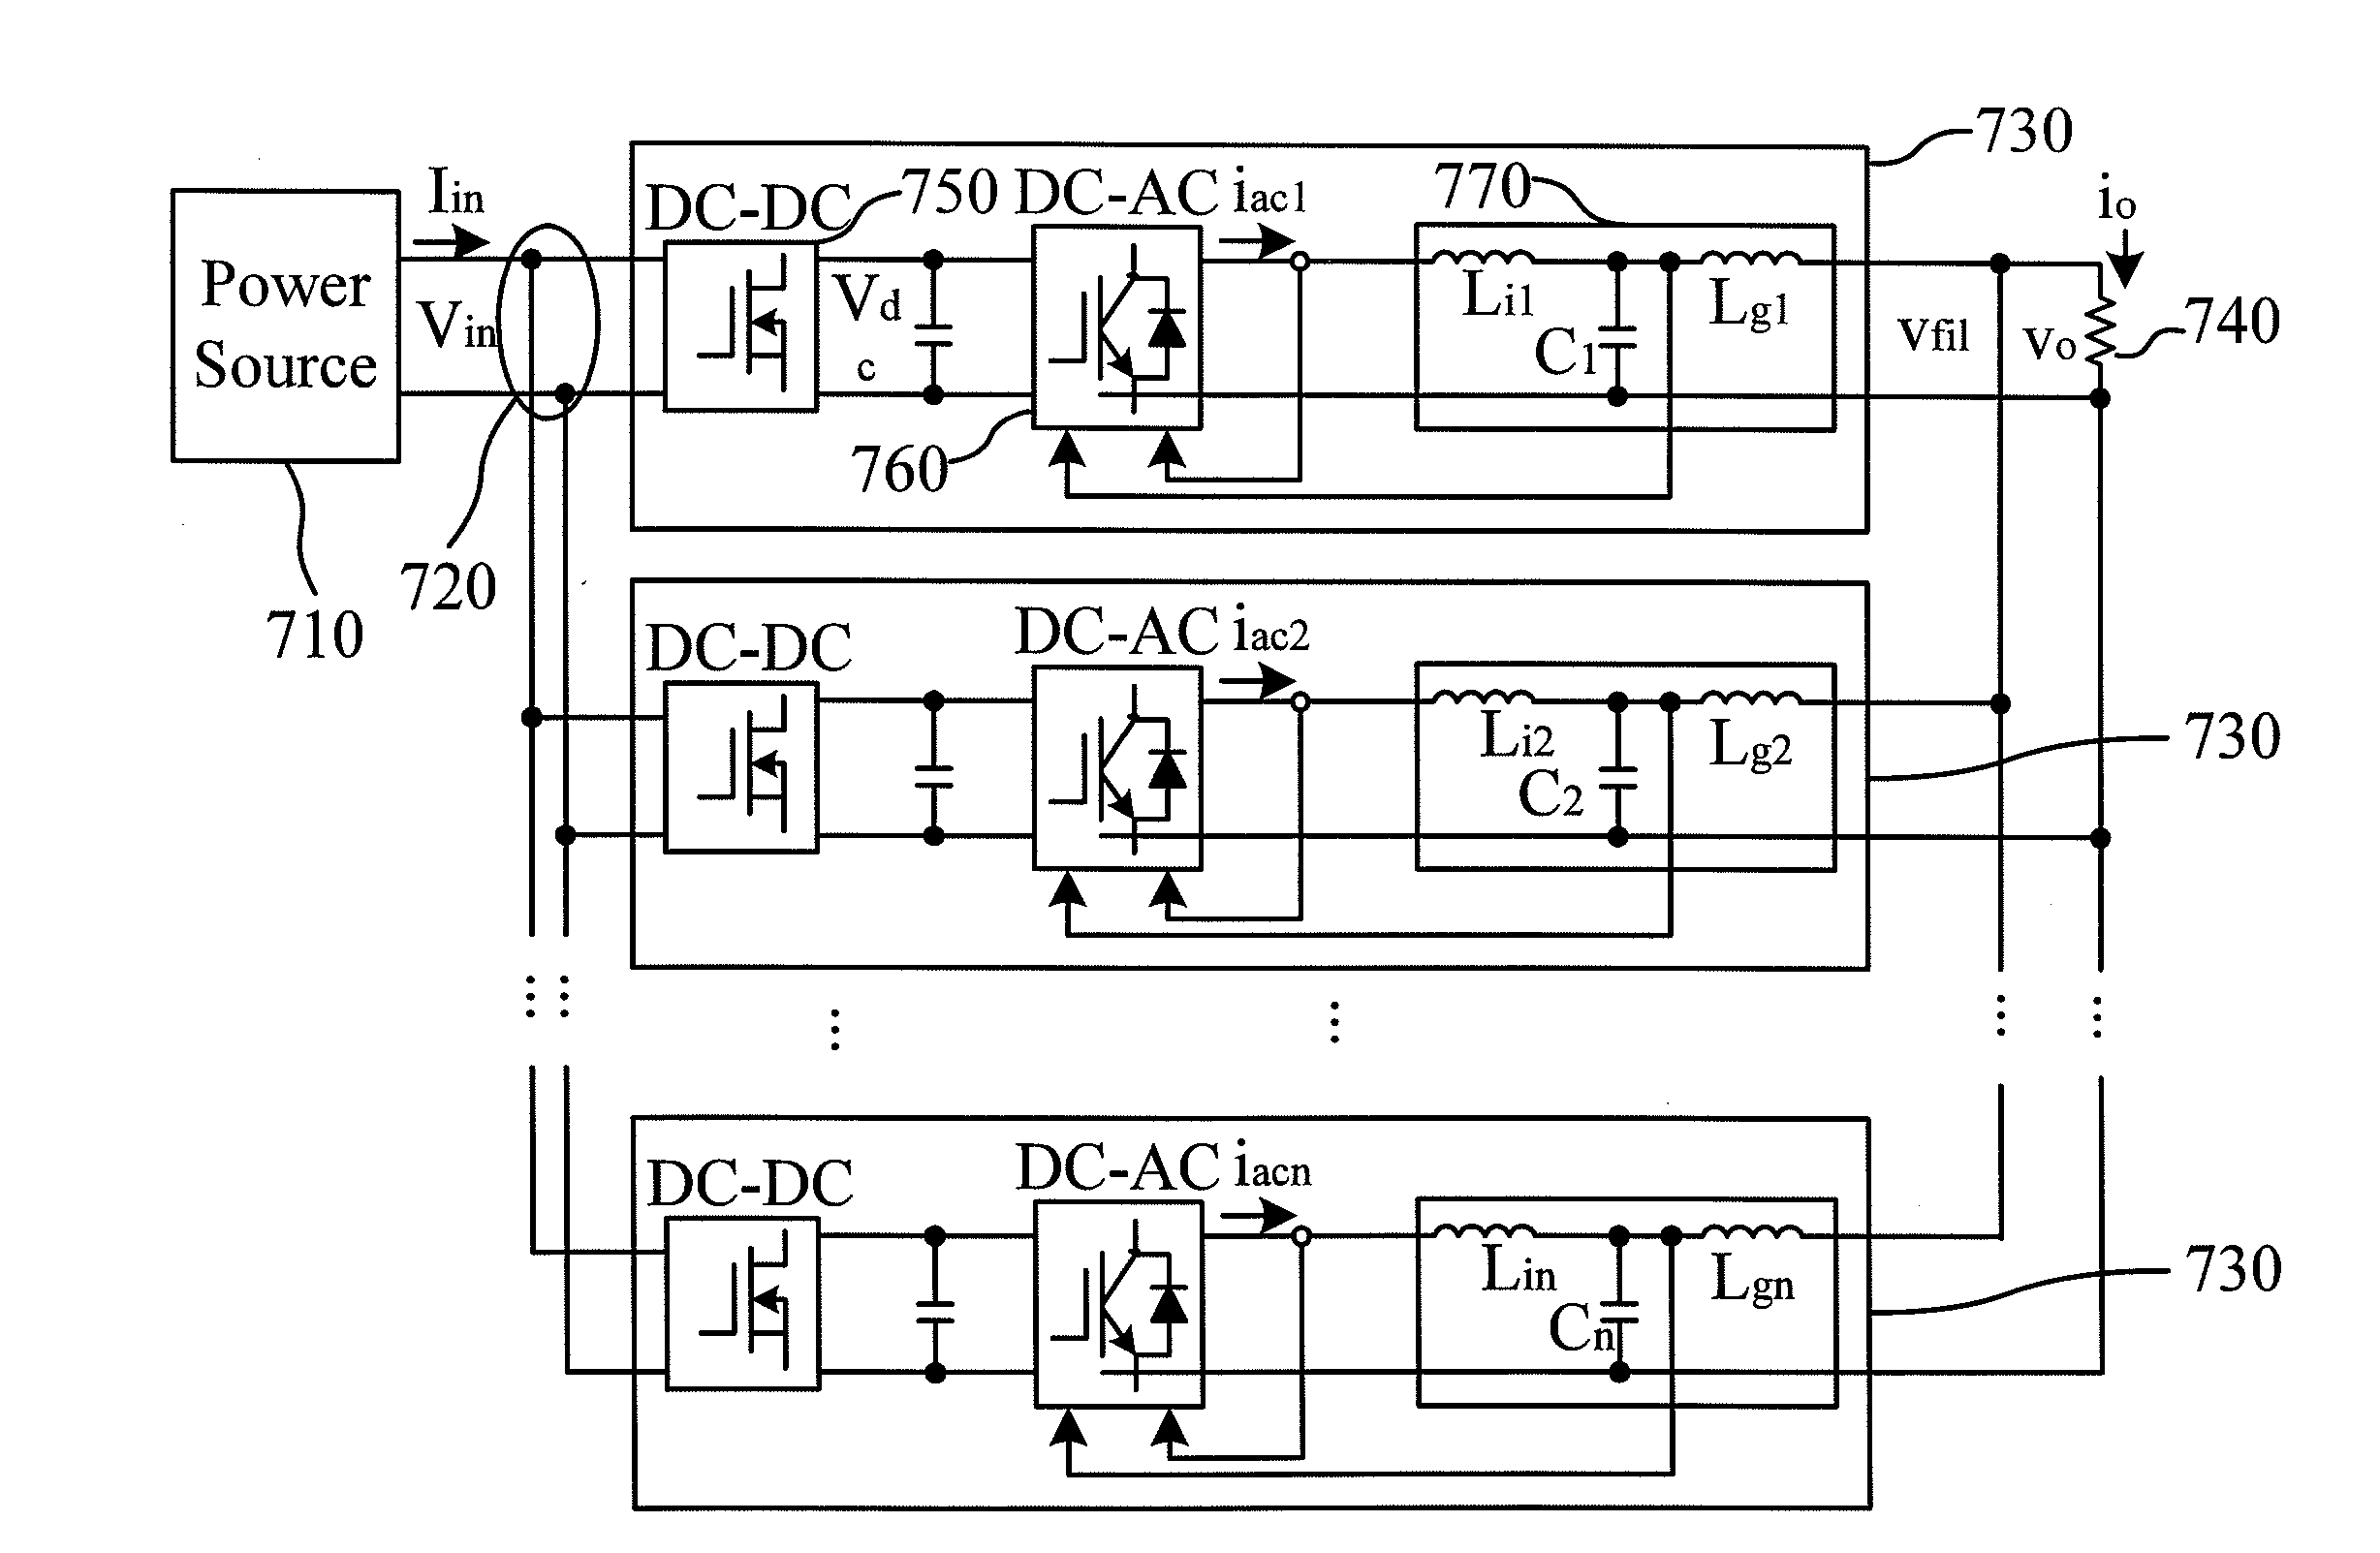 Paralleled power conditioning system with circulating current filter